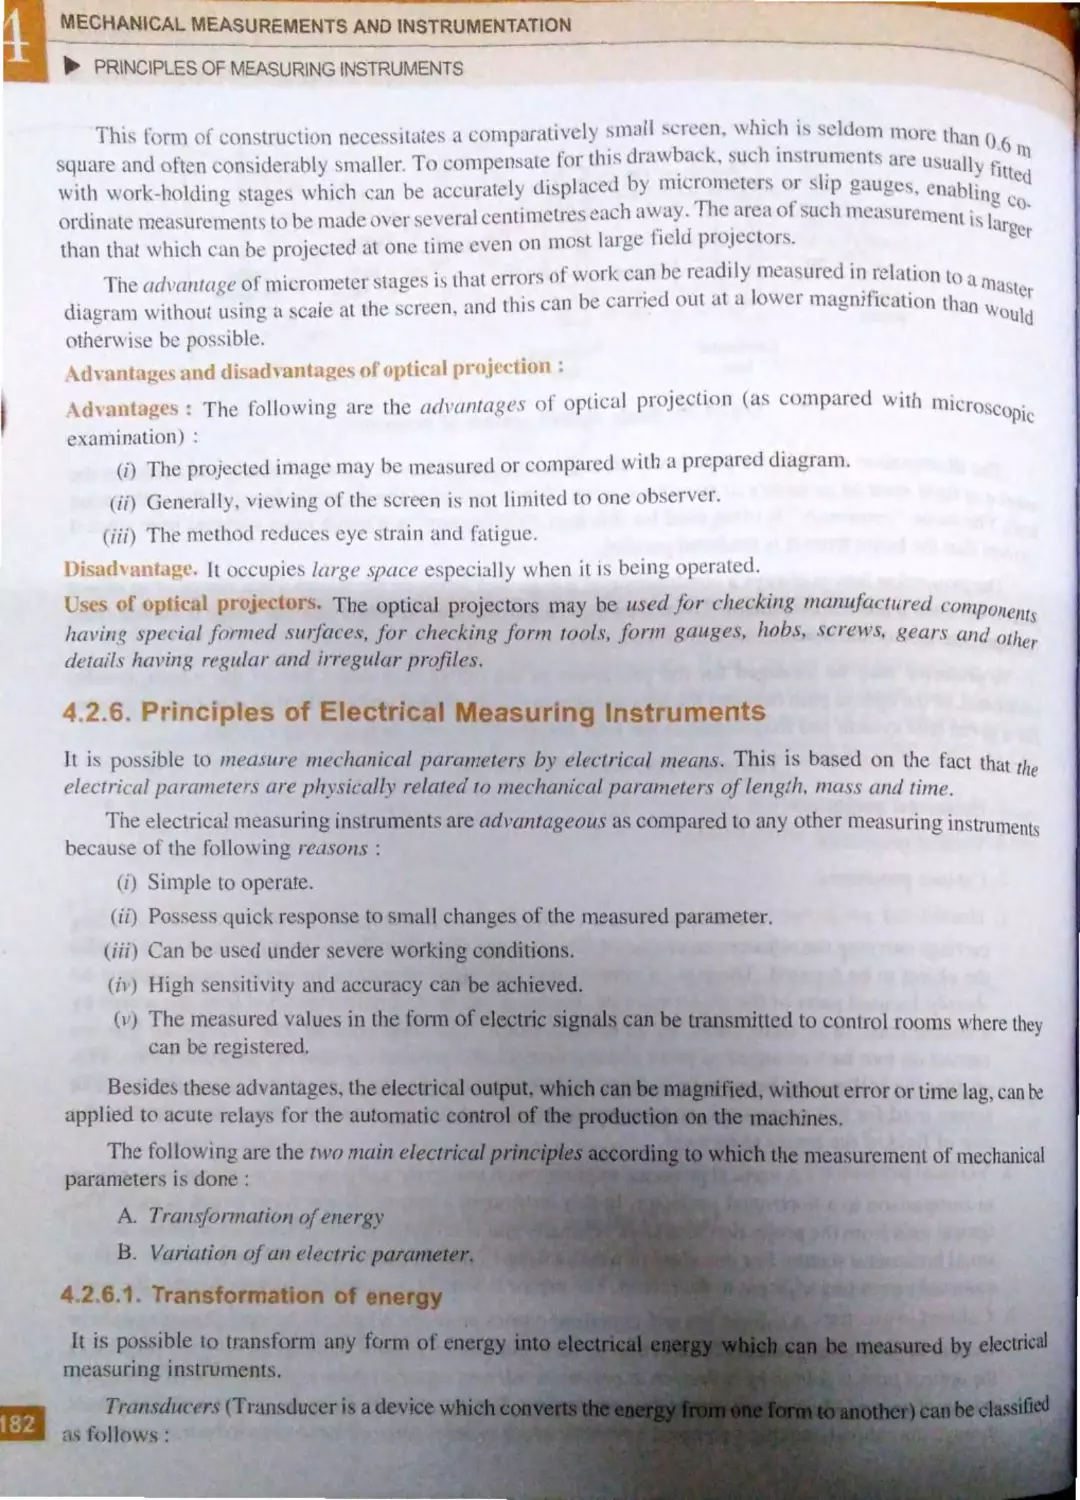 4.2.6. Principles of Electrical Measuring Instruments